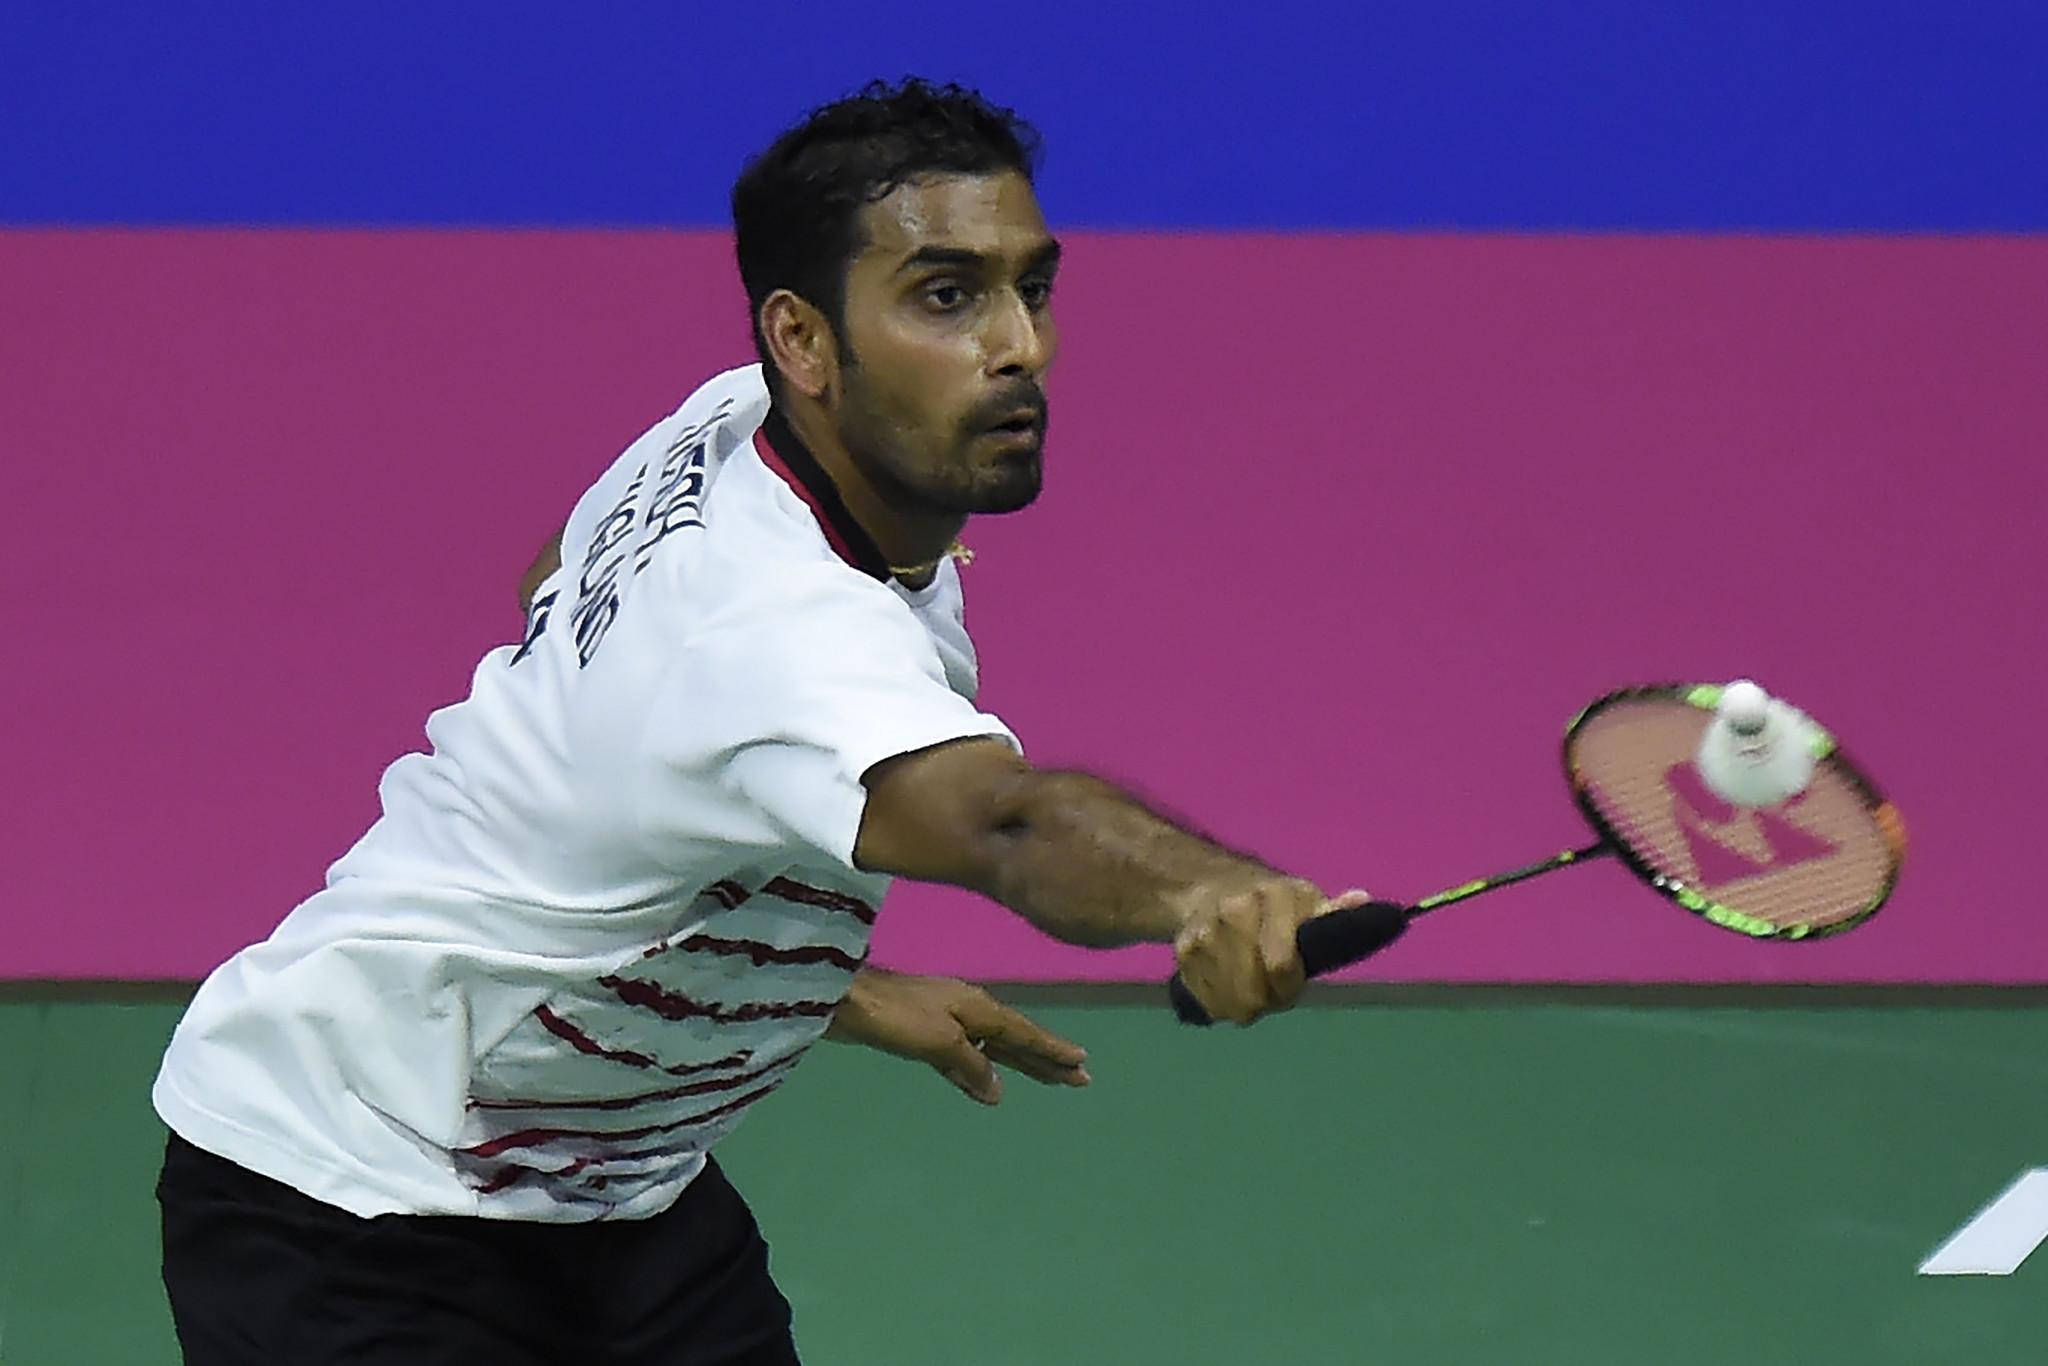 England to face defending champions Denmark in men's final at European Team Badminton Championships